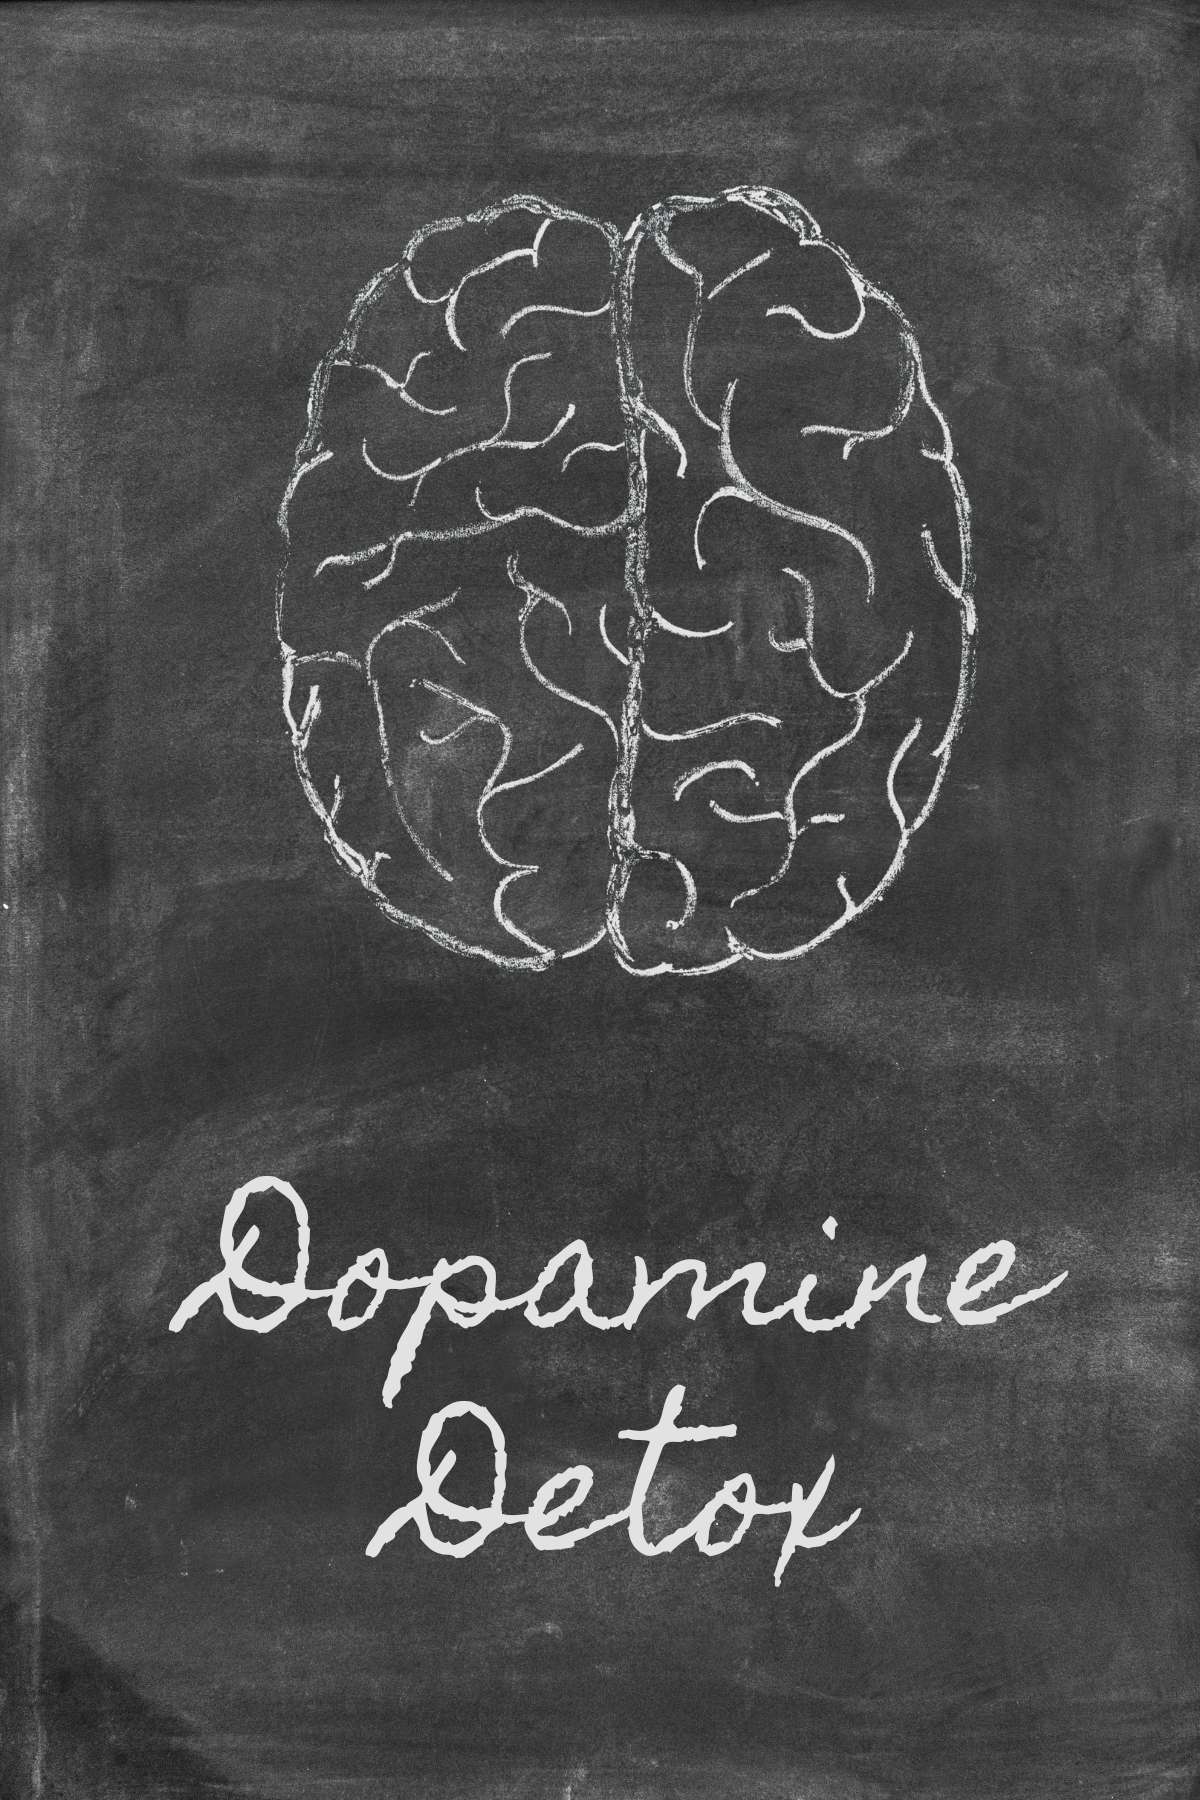 A line drawing of a brain on a chalkboard with the words "dopamine detox" written in chalk beneath it.